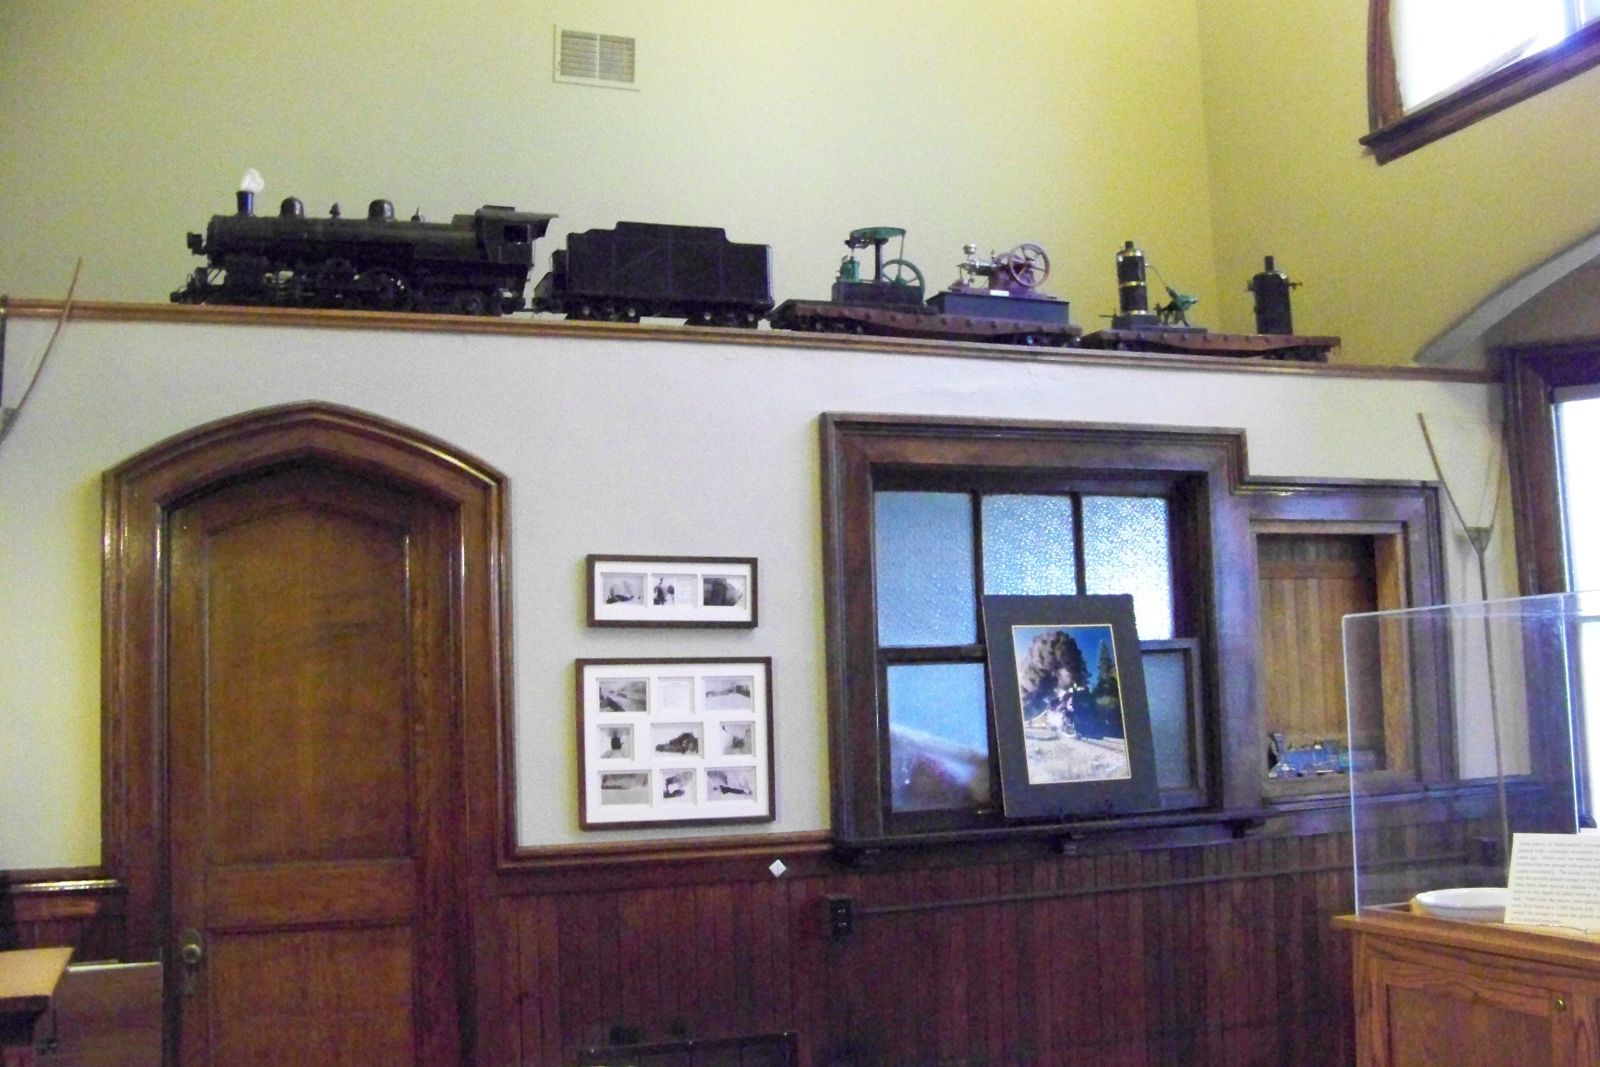 Train Display in Ticket Office